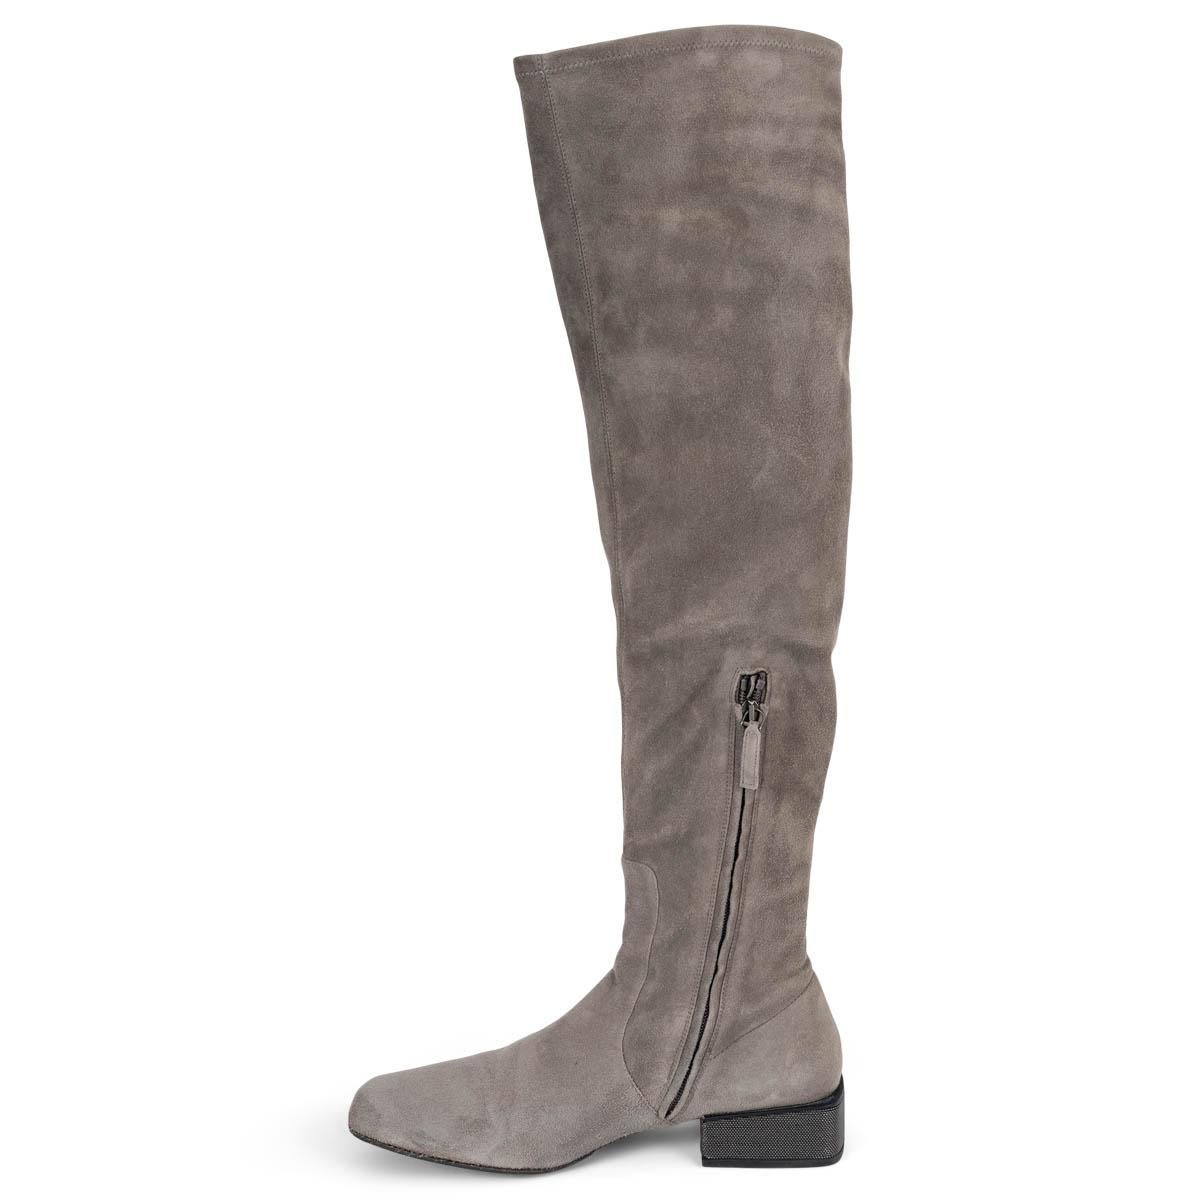 BRUNELLO CUCINELLI grey suede MONILI BLOCK HEEL OVER KNEE Boots Shoes 39 In Good Condition For Sale In Zürich, CH